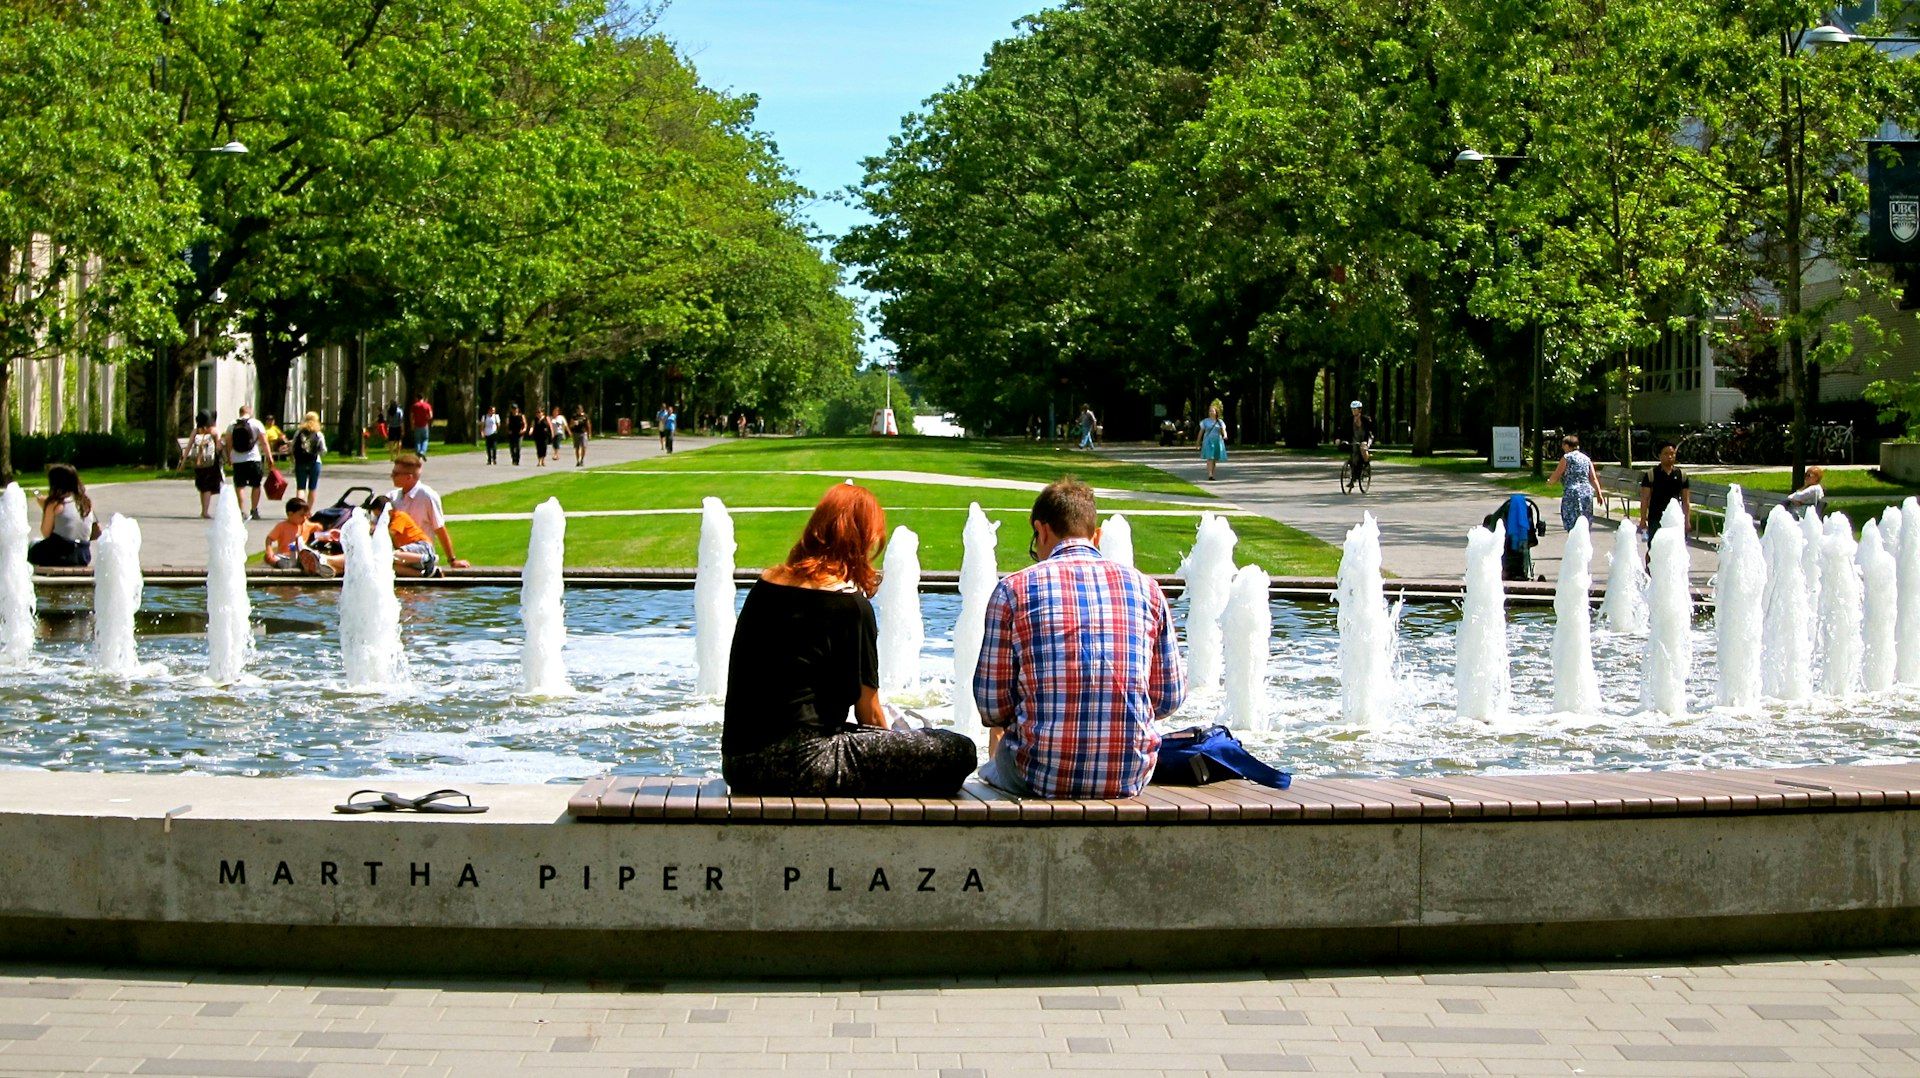 The campus is an idyllic place to hangout for the day © John Lee / Lonely Planet